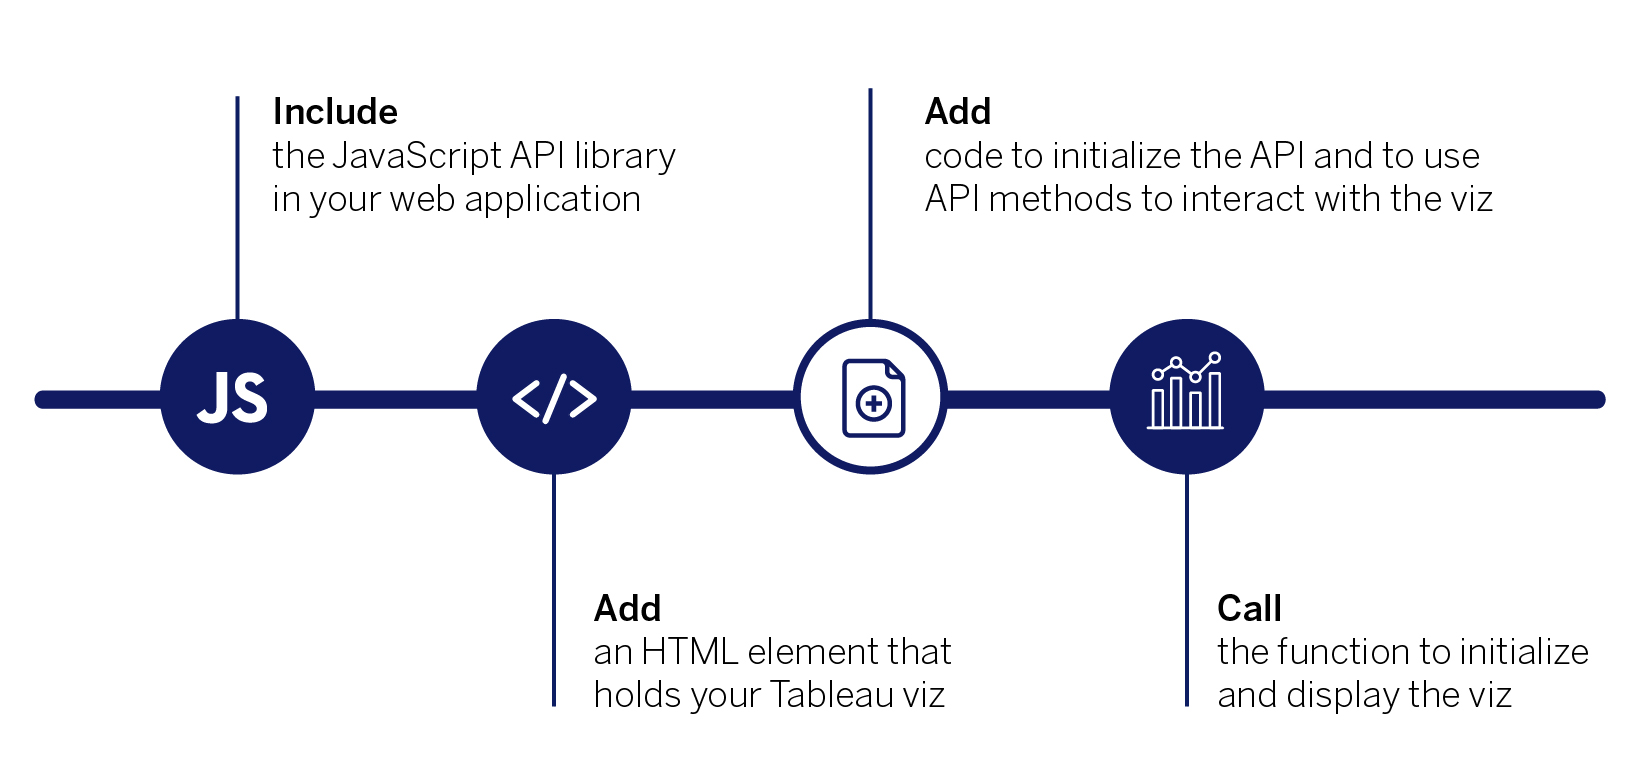 Add code to initialize the API and to use API methods to interact with the viz